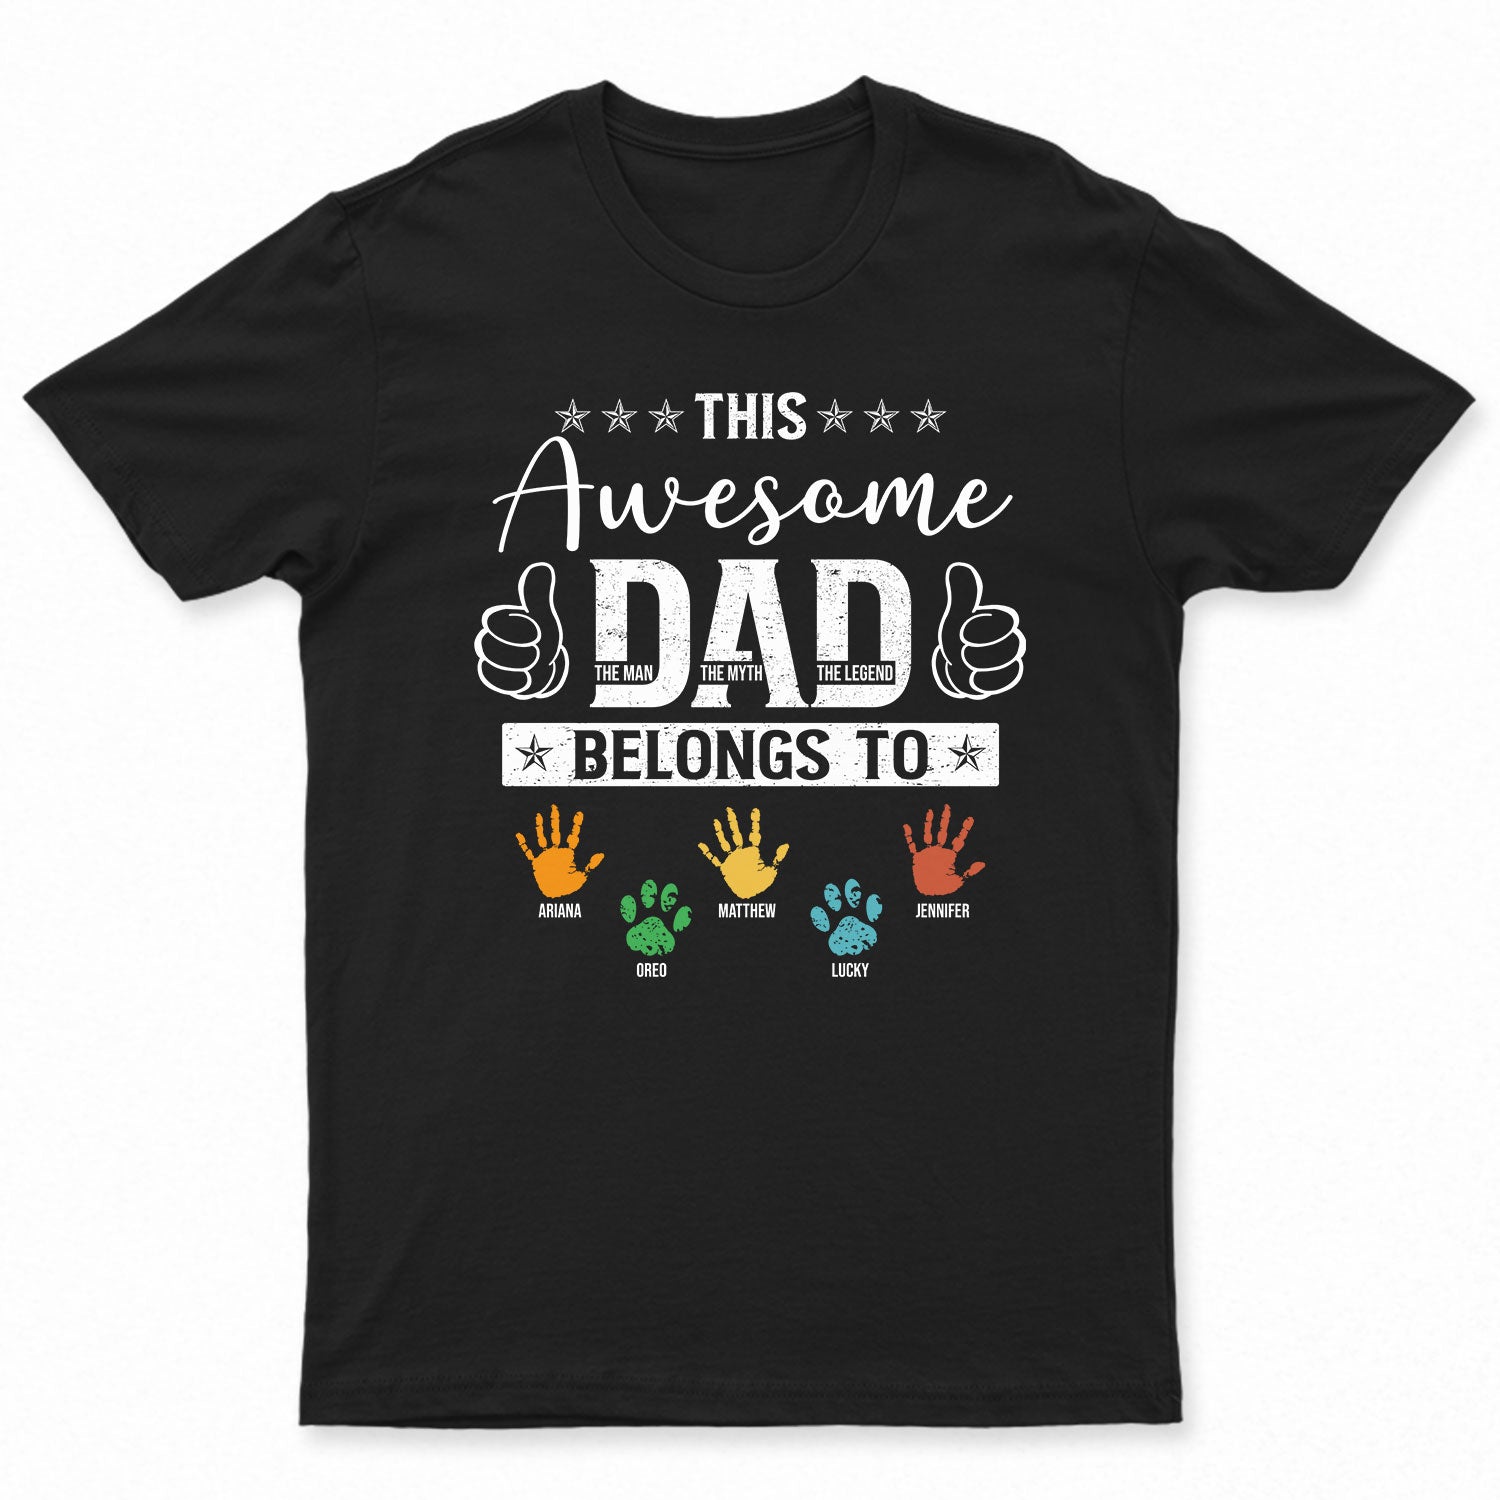 Awesome Dad The Man The Myth The Legend - Birthday, Loving Gift For Daddy, Father, Grandpa, Grandfather - Personalized Custom T Shirt